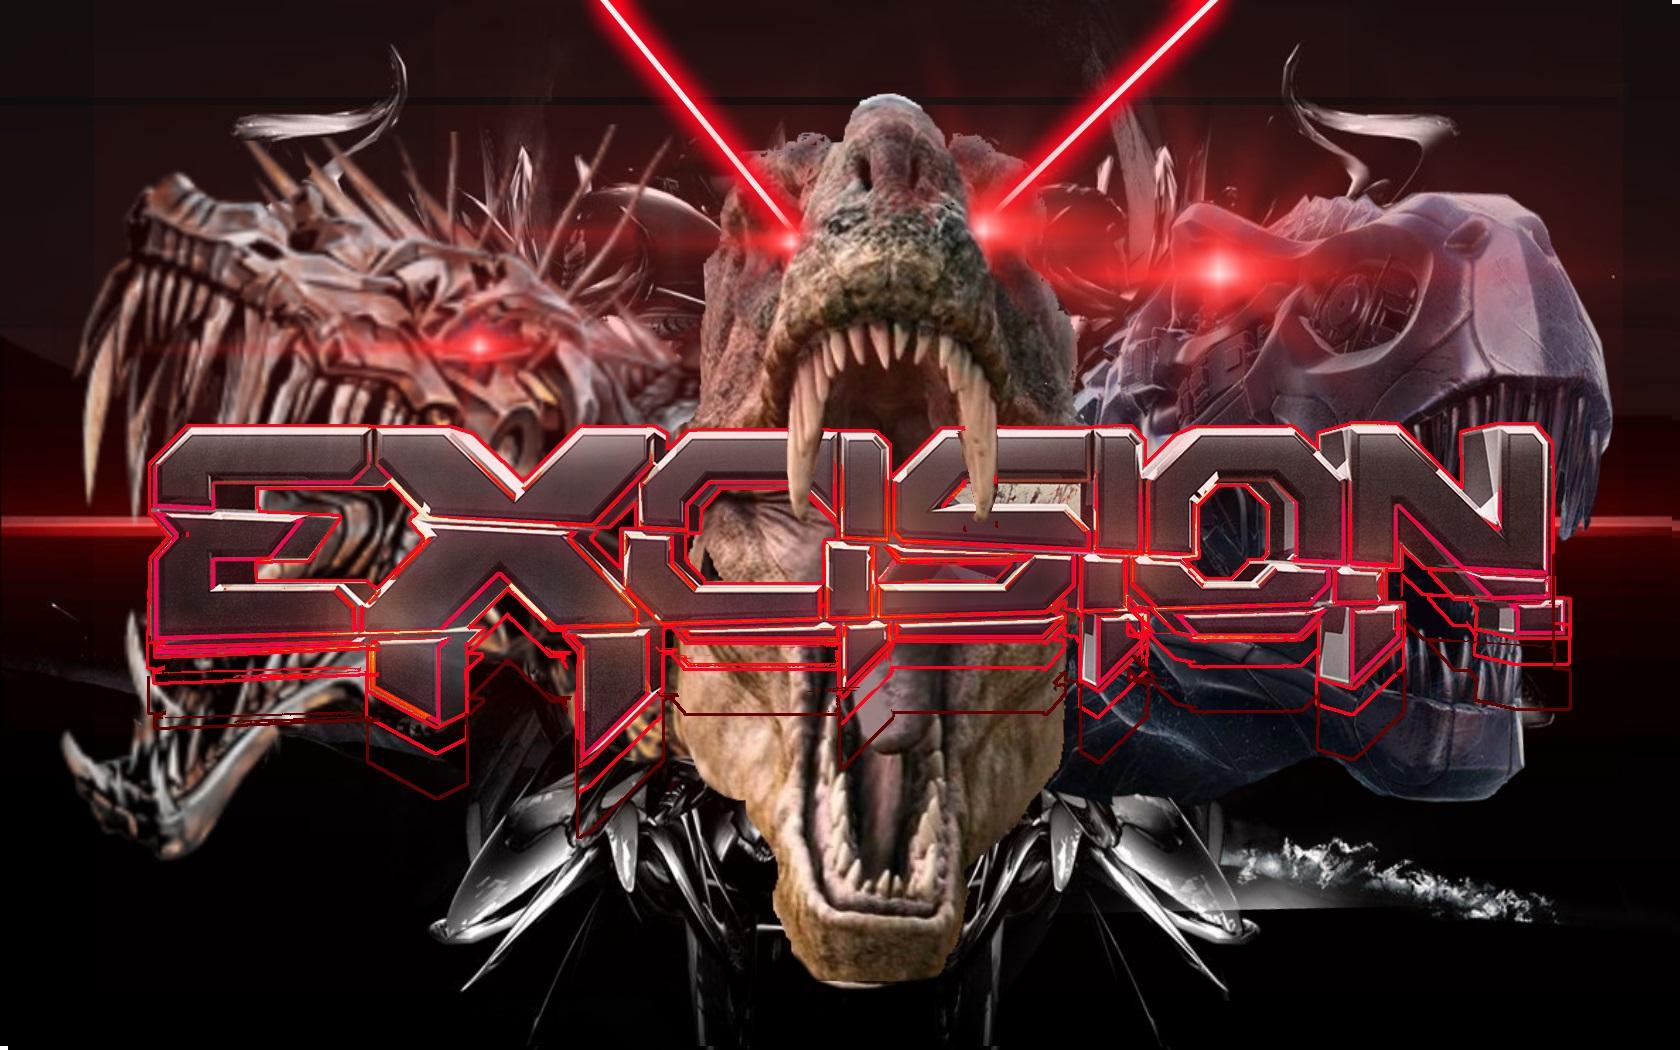 I was bored so I made this wallpapers : Excision.